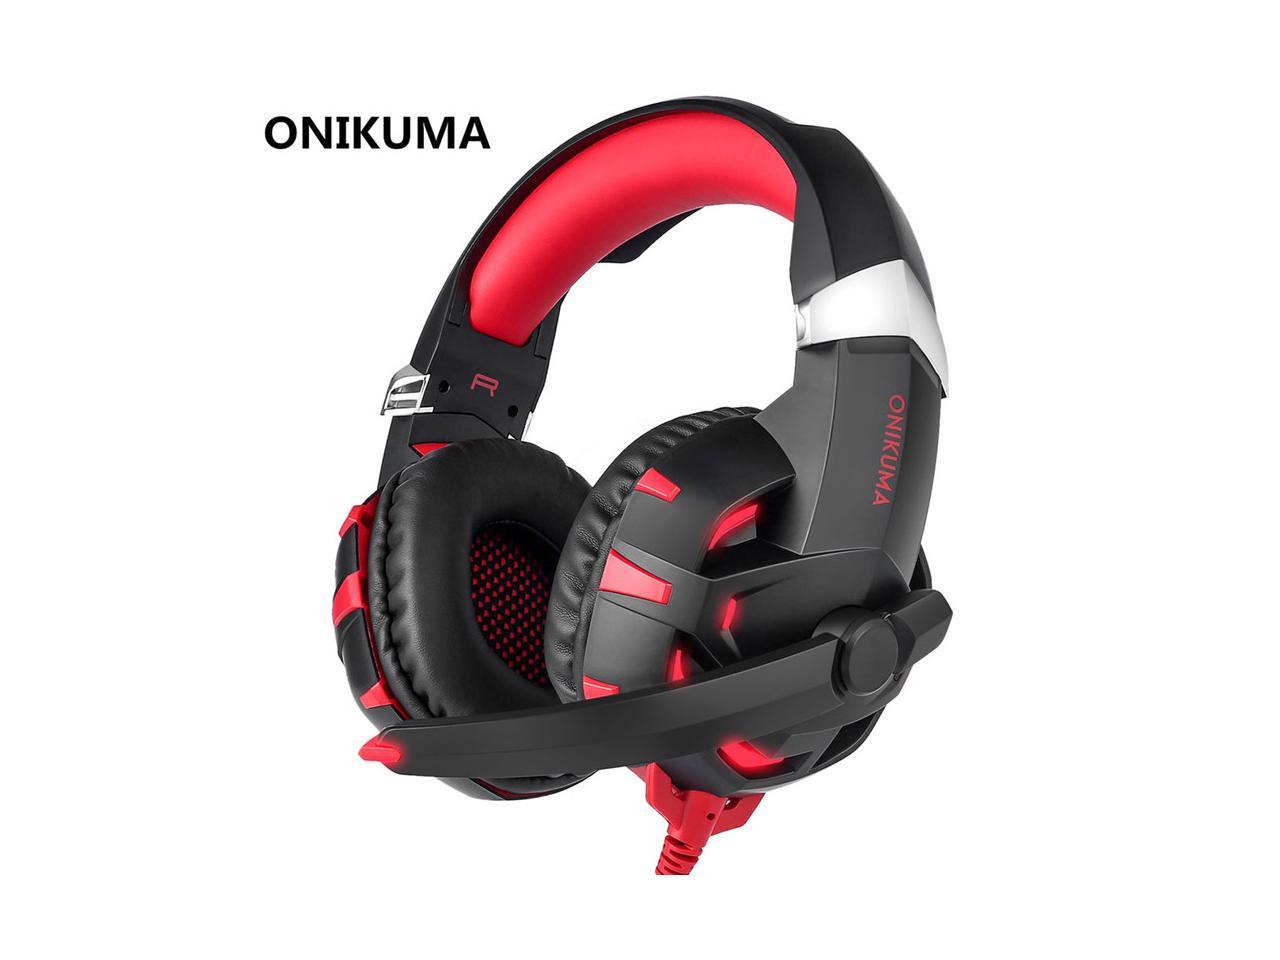 ONIKUMA K2 USB 7.1 Channel Sound Stereo Gaming Headphones Casque Gamer Headset with Mic LED Light for Computer PC Laptop